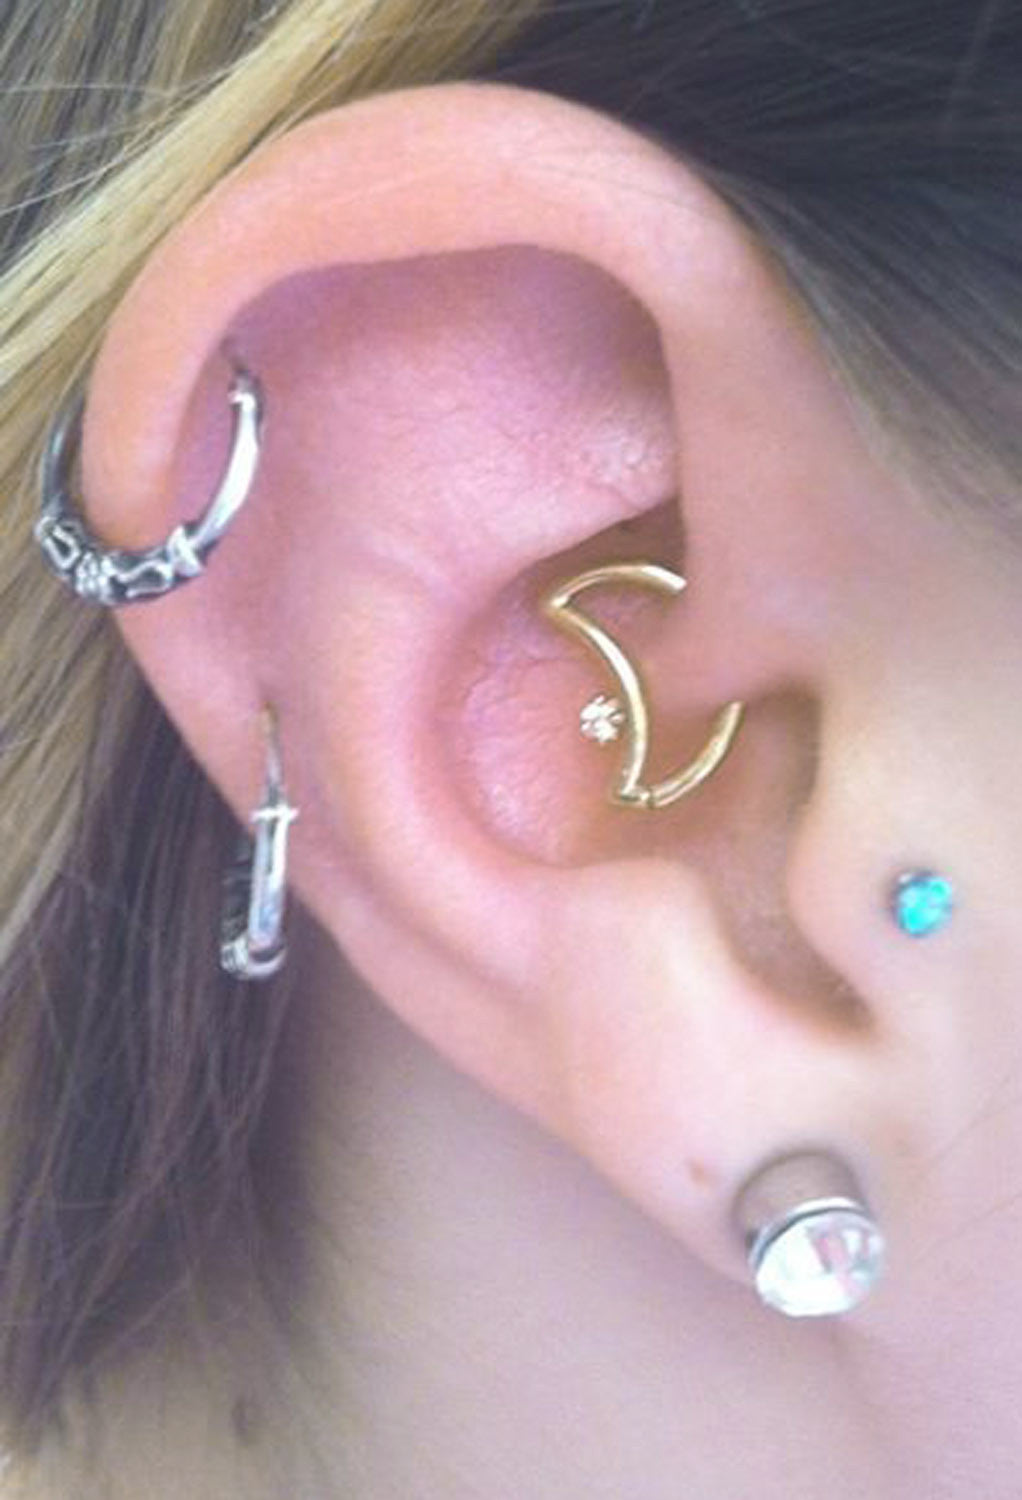 Most Gorgeous Multiple Ear Piercing Ideas at MyBodiArt.com - Cartilage Piercing Hoop, Moon Rook Earring, Tragus Stud, Helix Ring